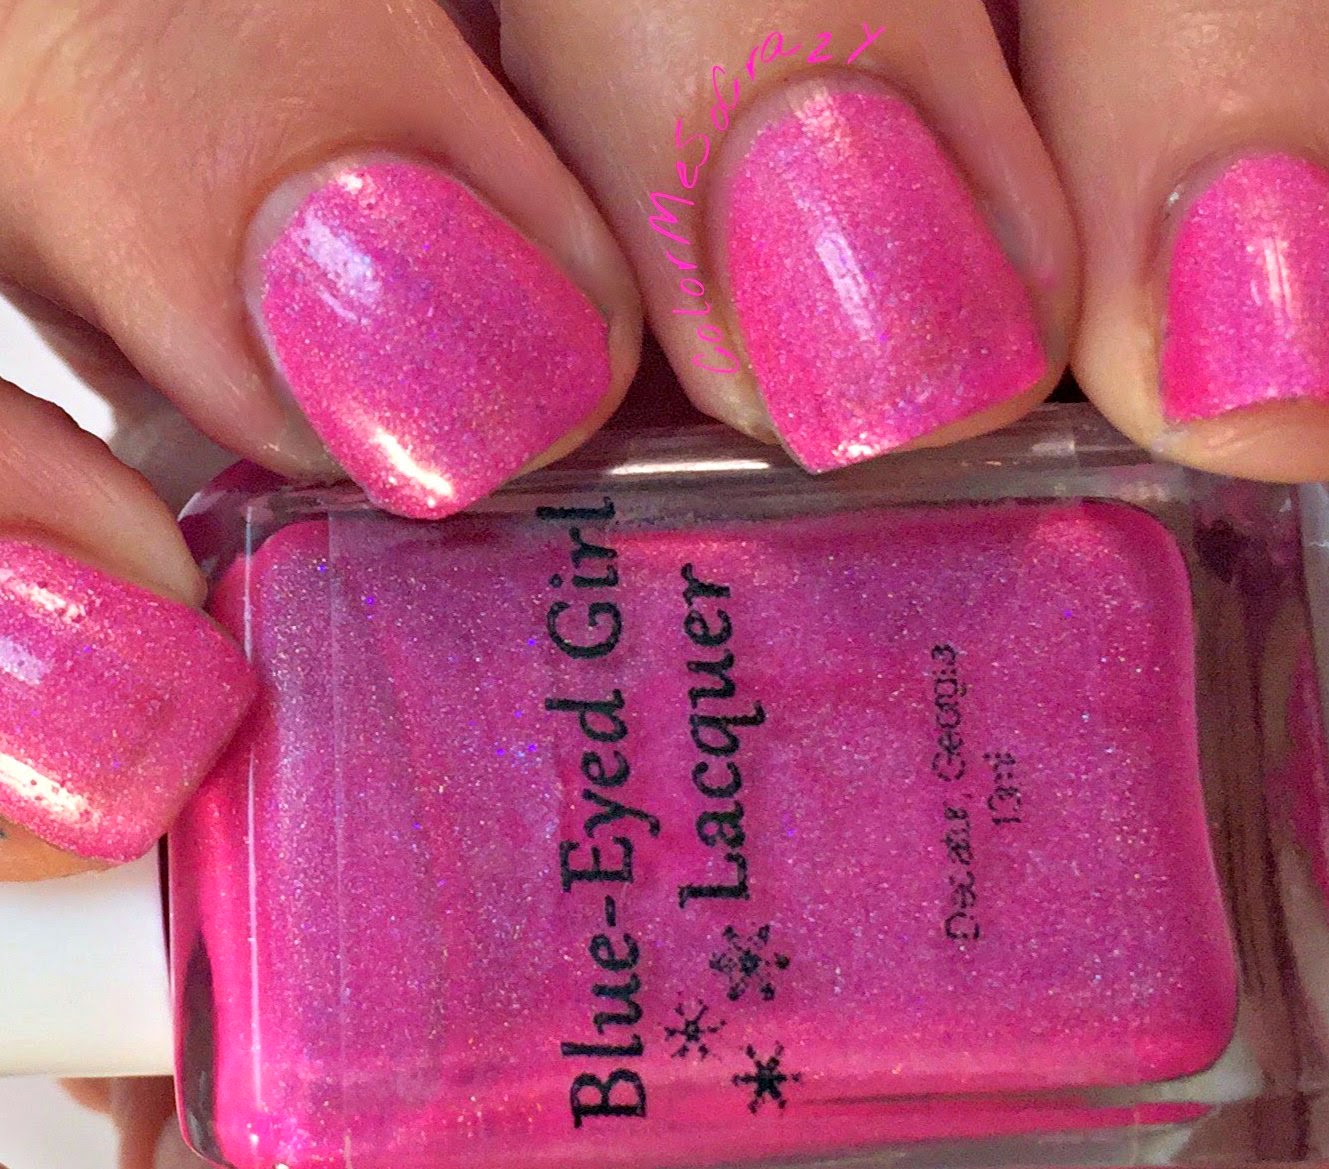 begl, blue eyed girl lacquer, nail polish, pink, spark in the dark, she's electricity, pink indie polish